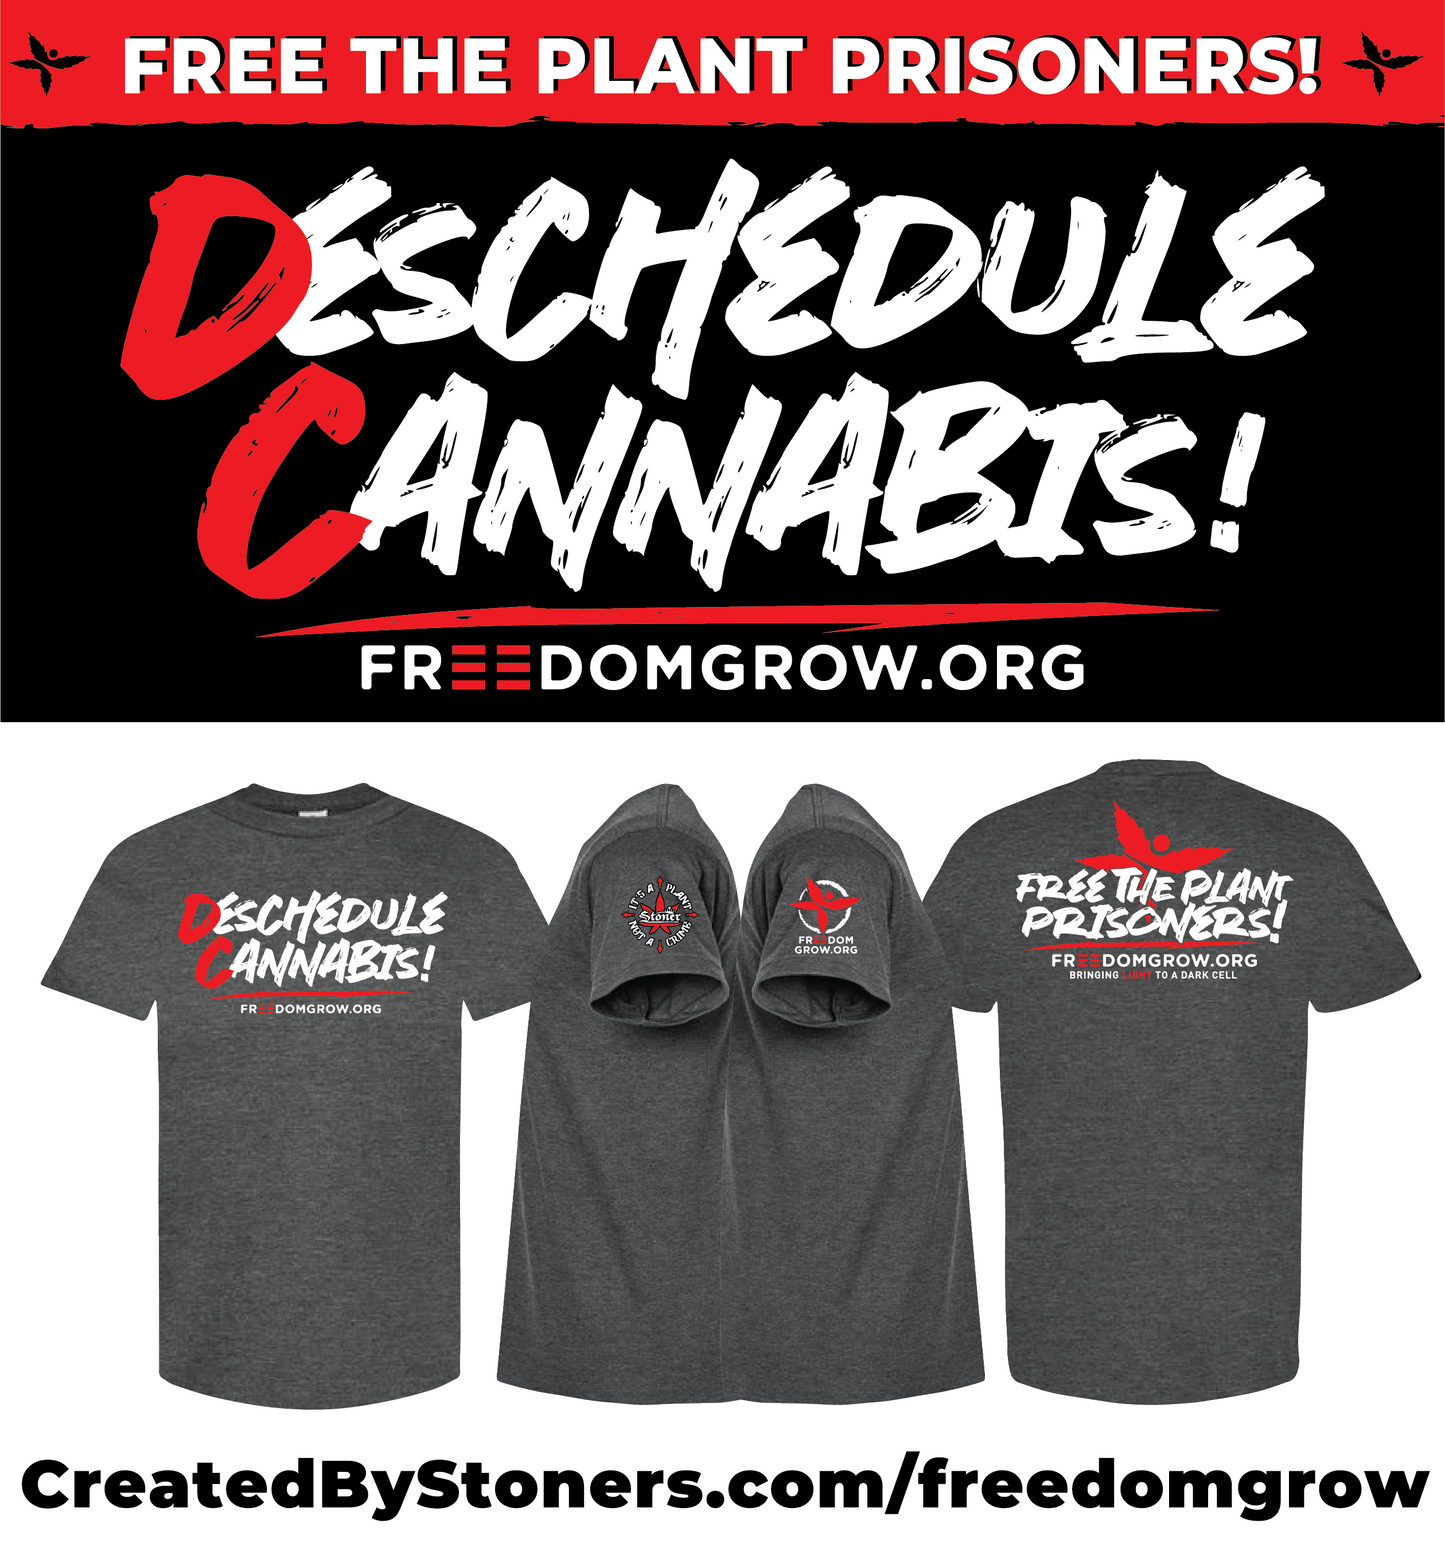 Created By Stoners x FreedomGrow.org Deschedule Collab (Women's)